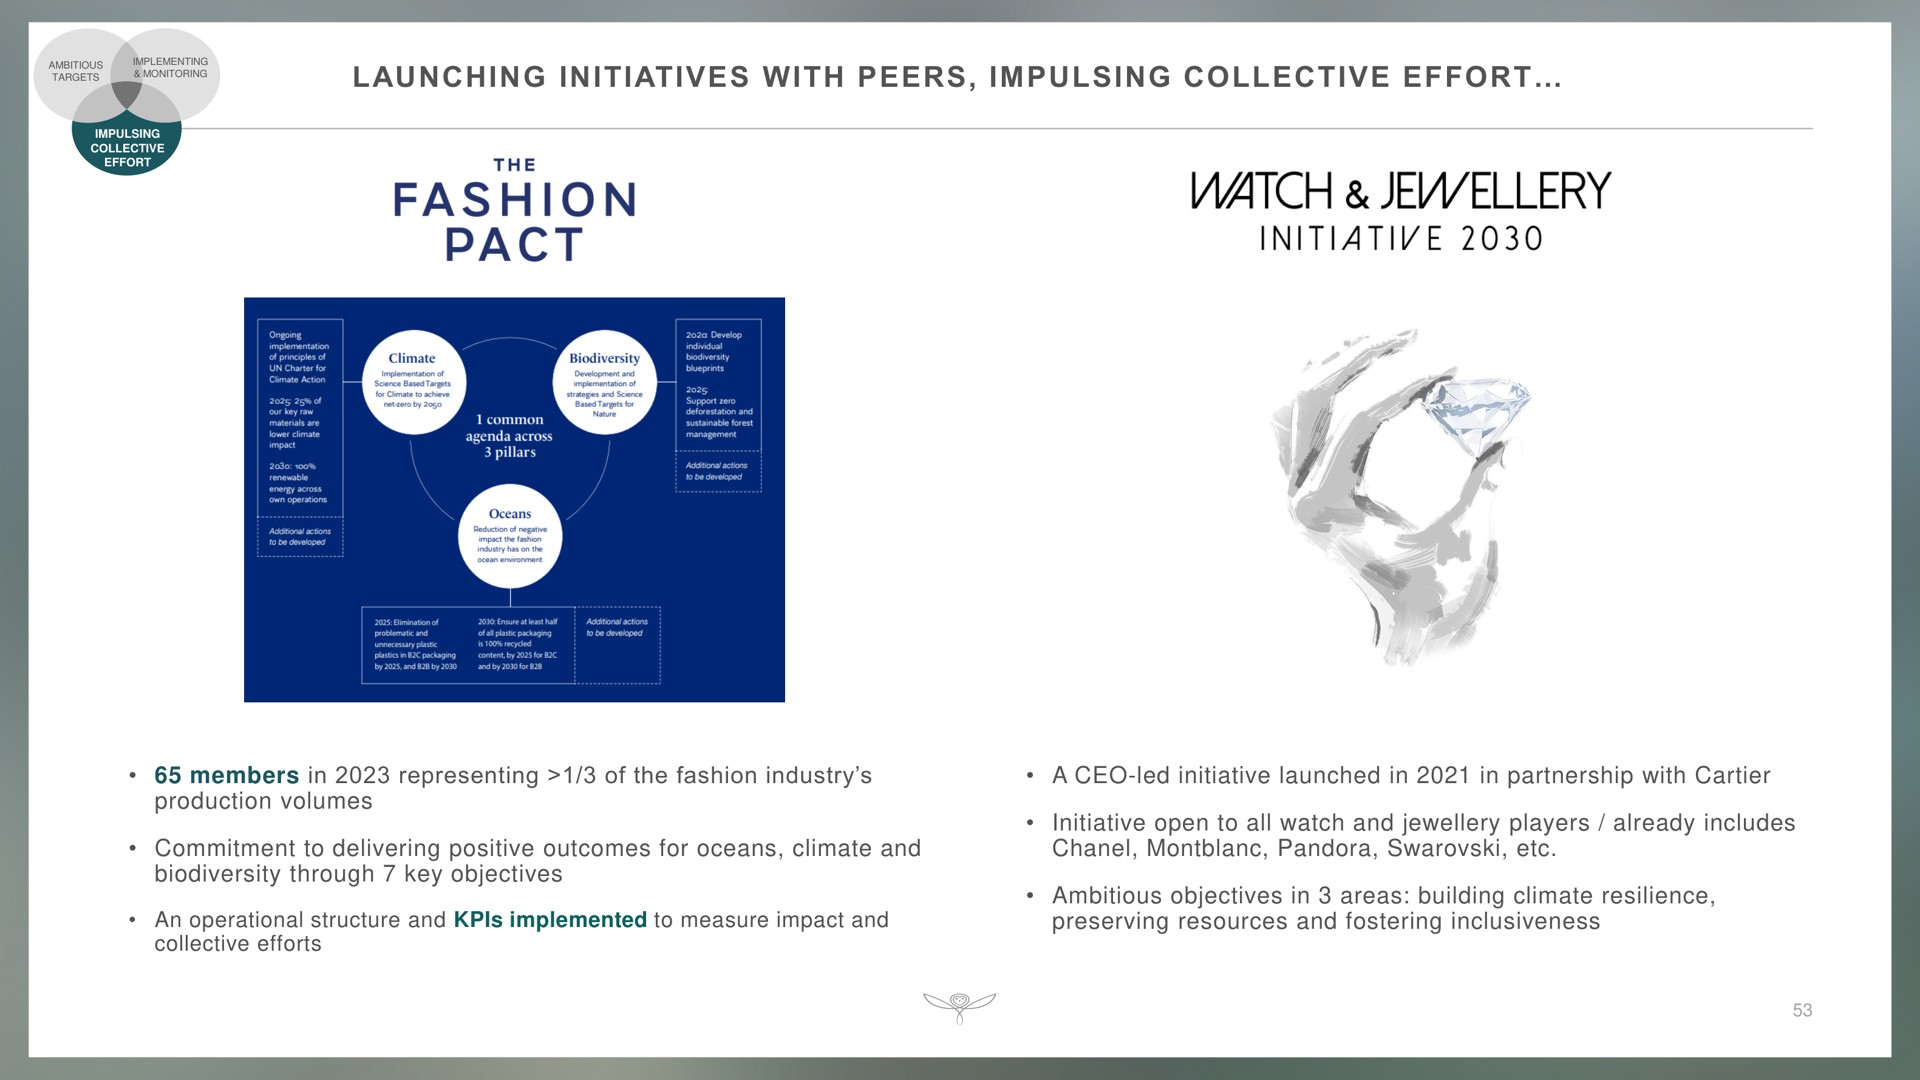 launching initiatives with peers collective effort members in representing of the fashion industry a led initiative launched in in partnership with production volumes commitment to delivering positive outcomes for oceans climate and through key objectives initiative open to all watch and players already includes pandora ambitious objectives in areas building climate resilience preserving resources and fostering inclusiveness targets tess | Kering